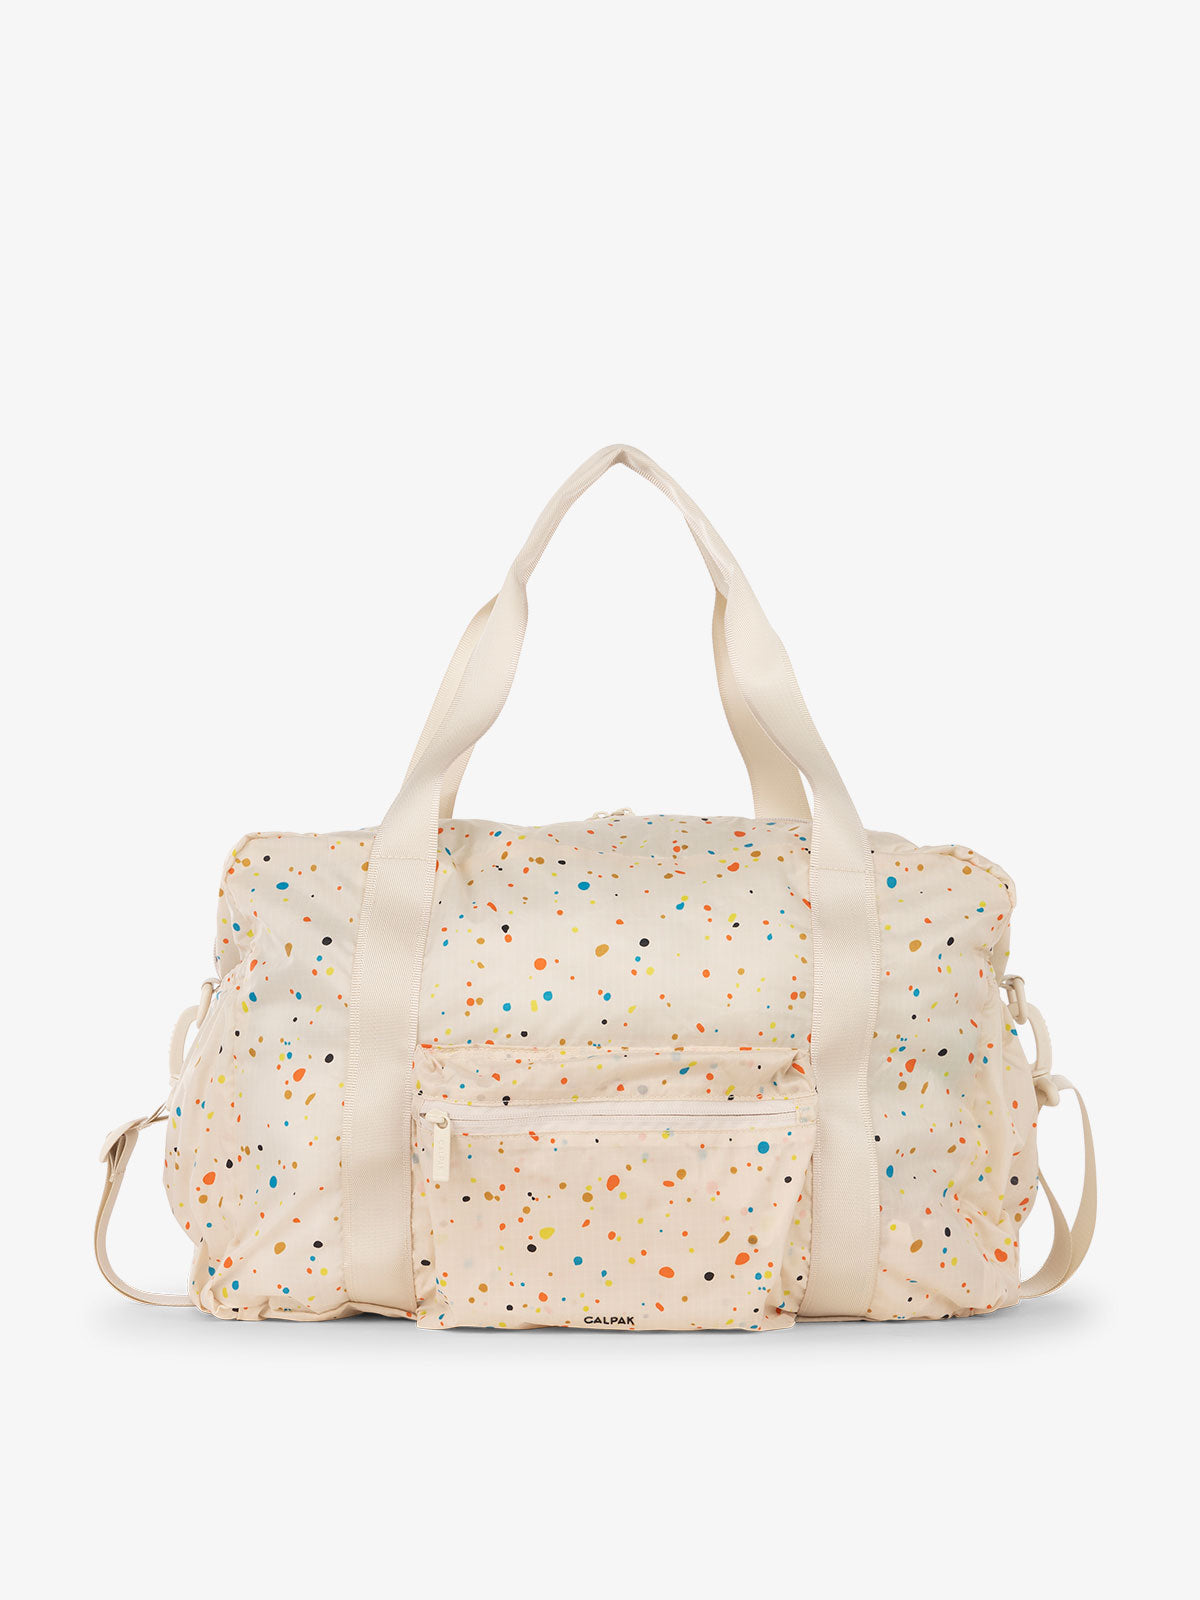 CALPAK Compakt duffel bag with removable crossbody strap and water resistant fabric in speckle